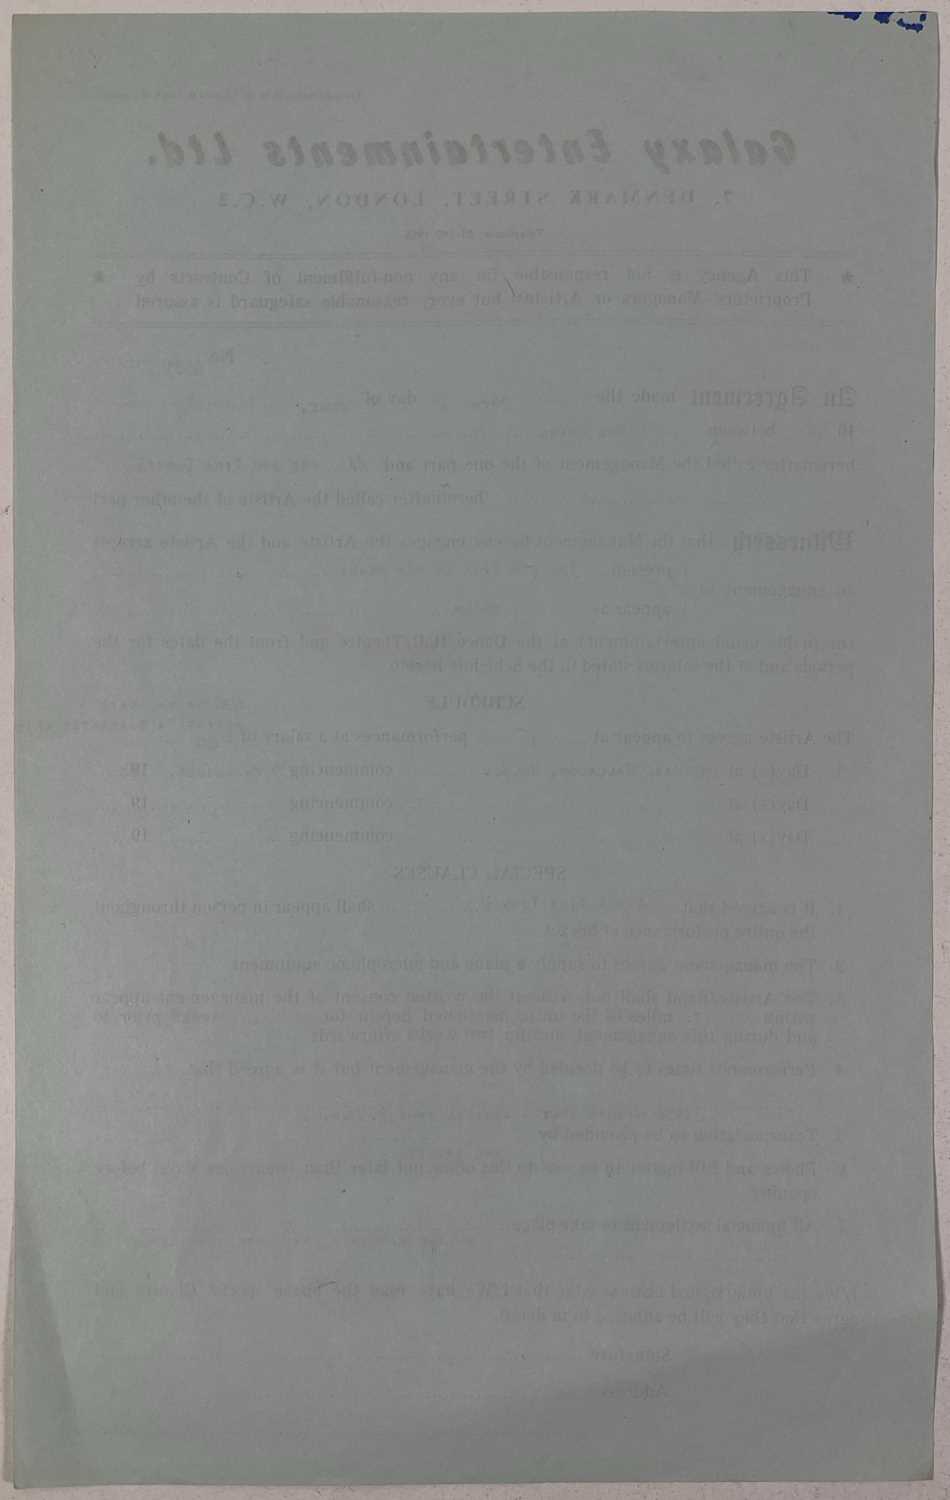 IKE AND TINA TURNER - ORIGINAL 1968 CONCERT CONTRACT. - Image 2 of 2